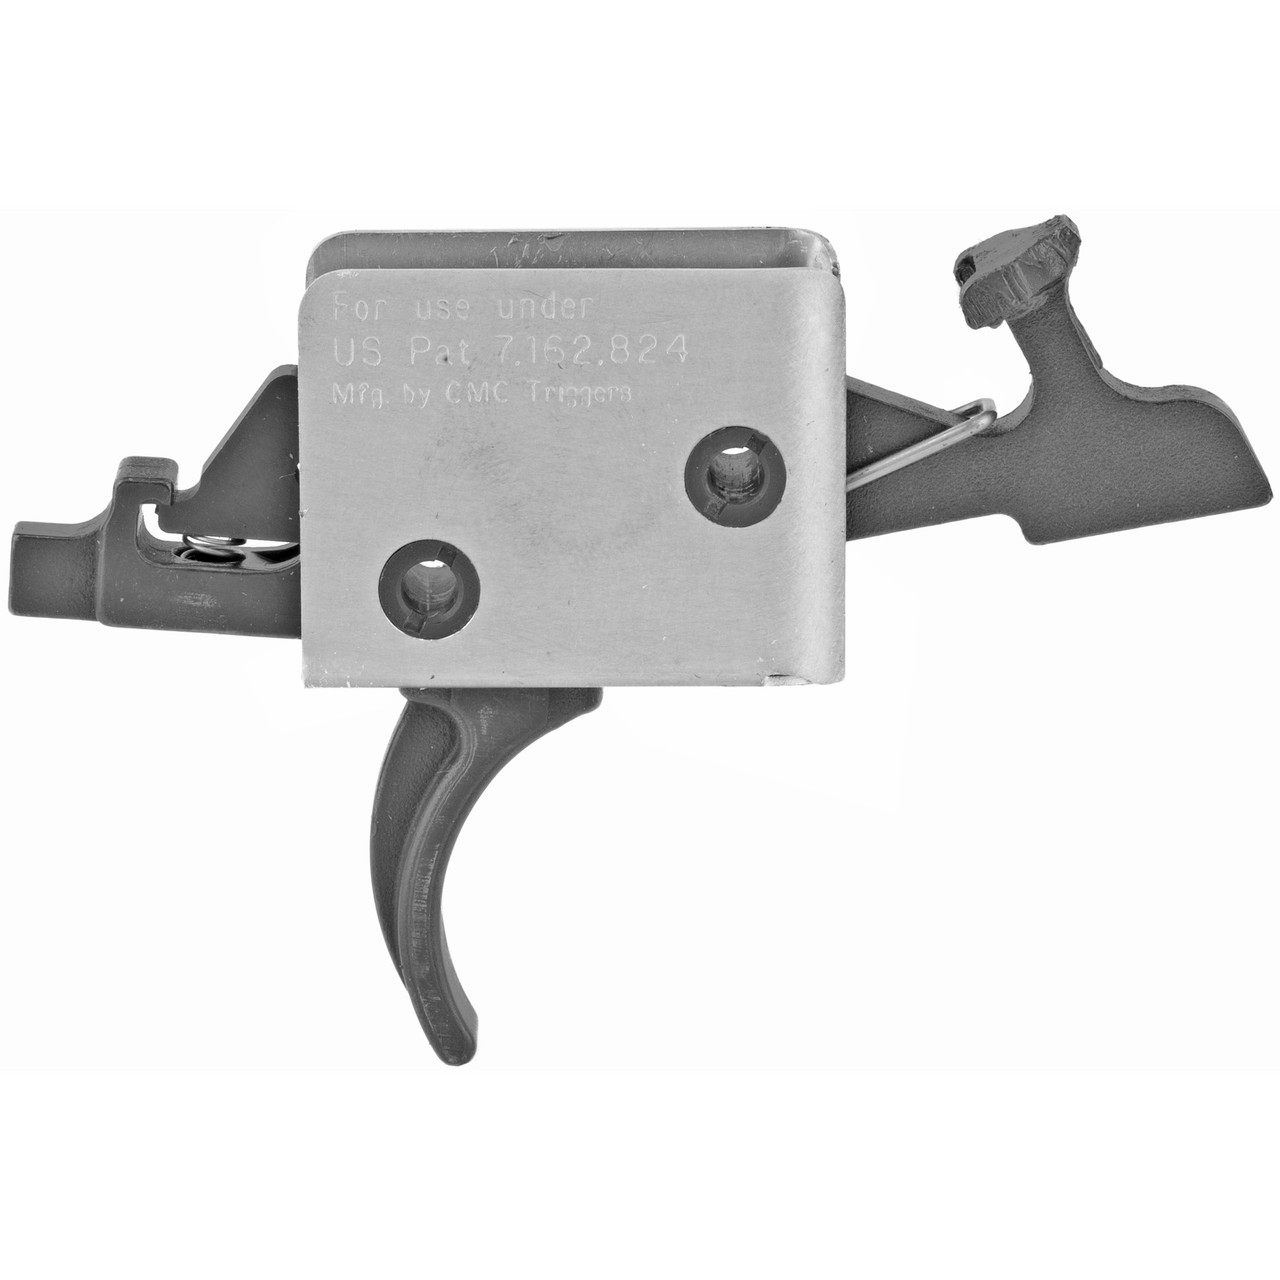 CMC Triggers 92502 Ar-15 2-stage Trigger Curved 2lb